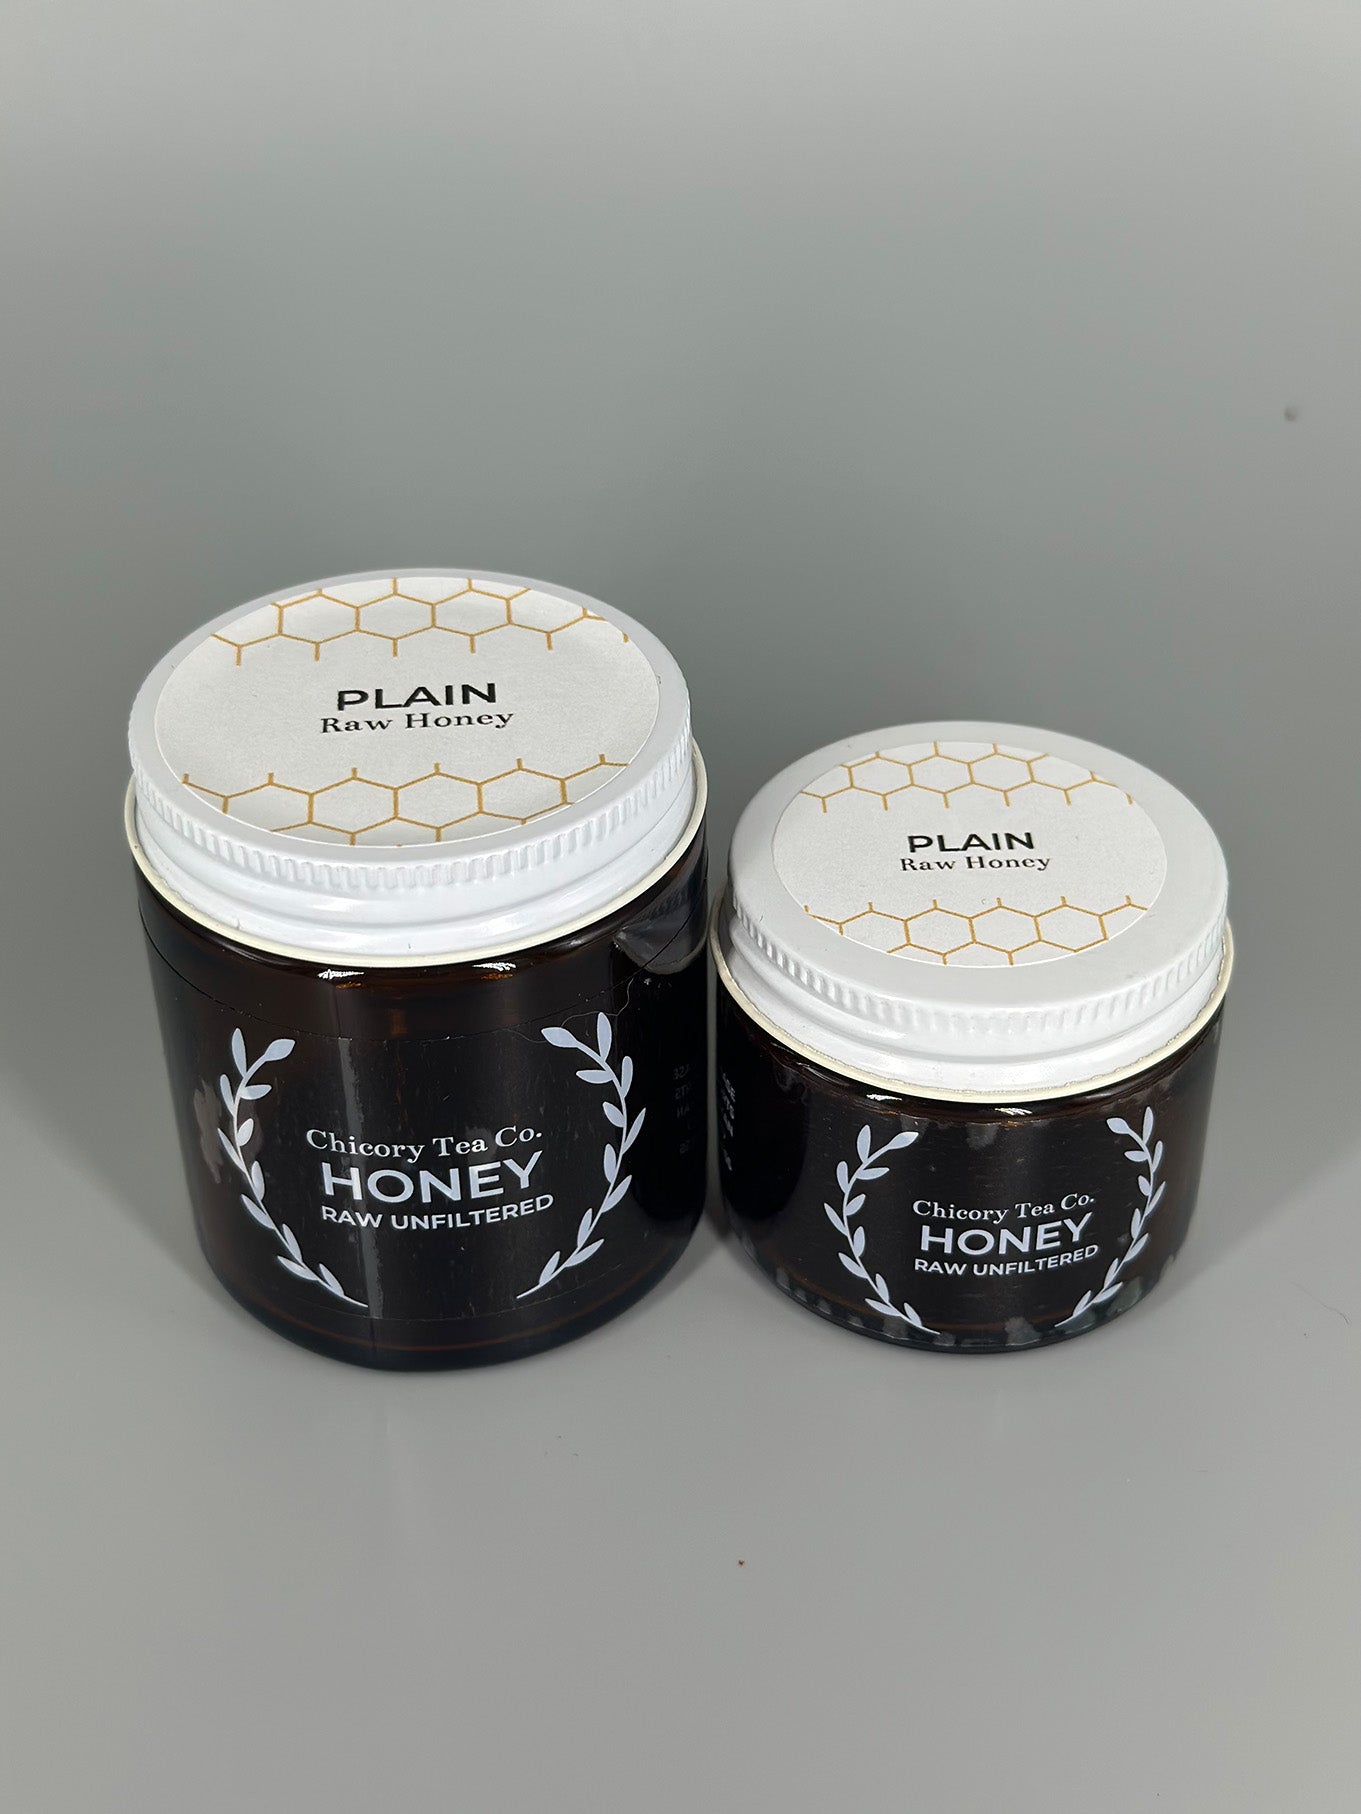 Chicory Tea Co.'s small and large Ohio Honey front view